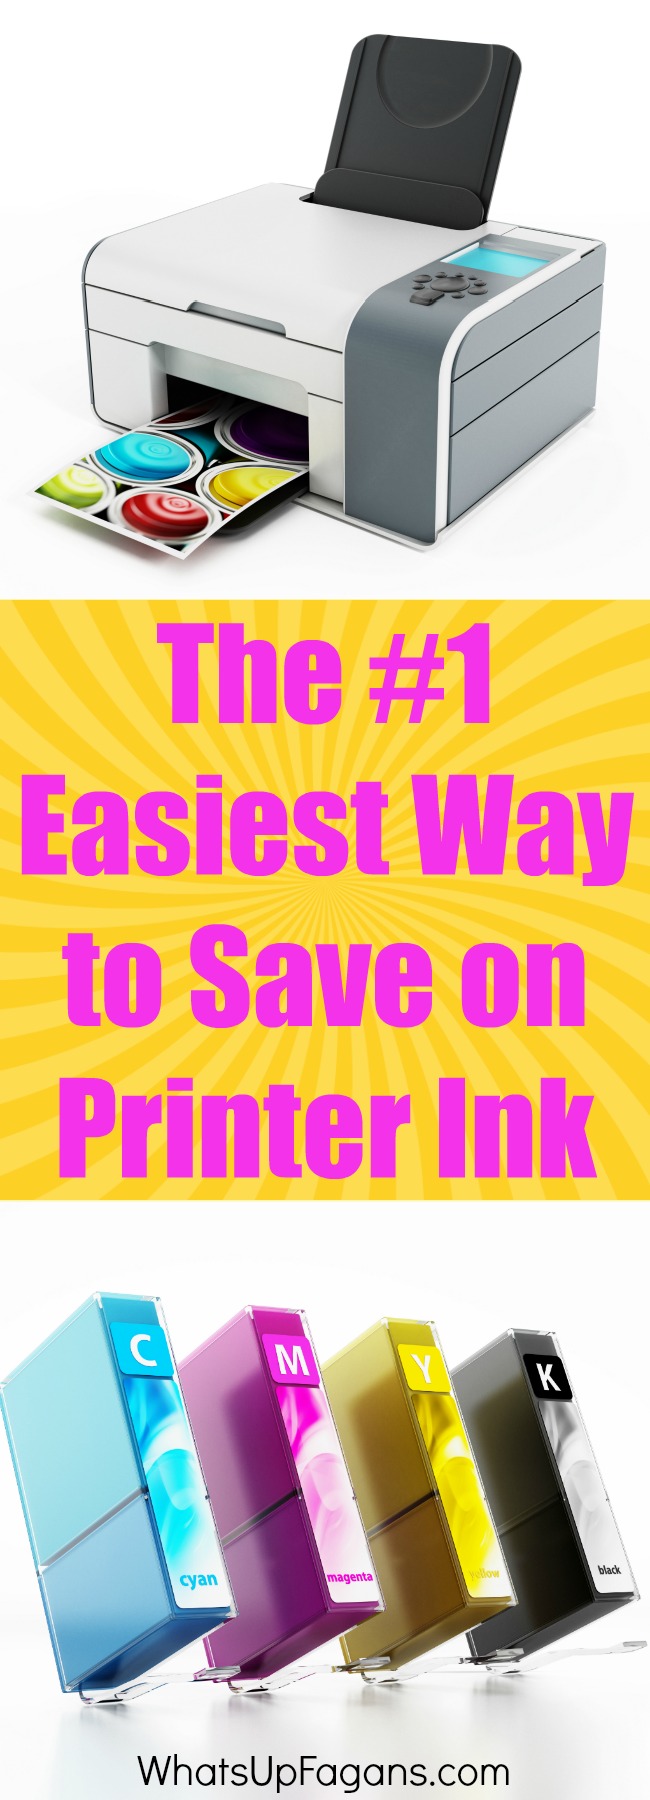 hp instant ink service review